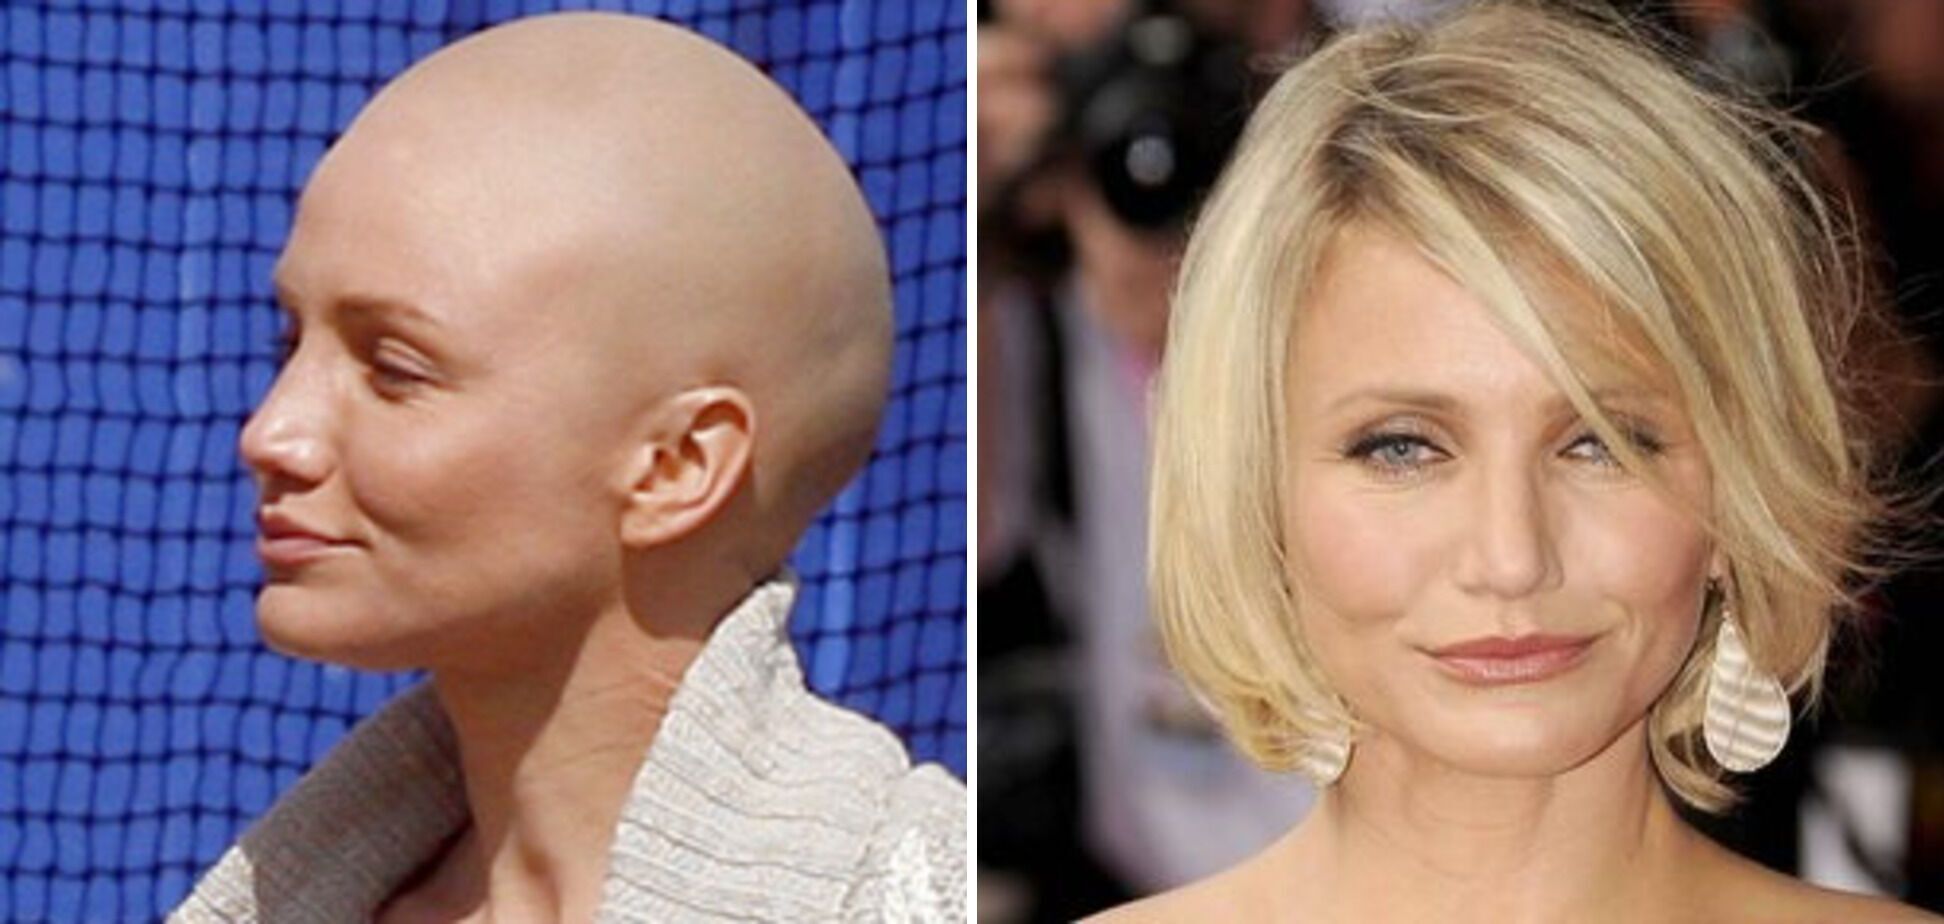 Five famous actresses who shaved their heads for a movie role, wowing fans. Photos